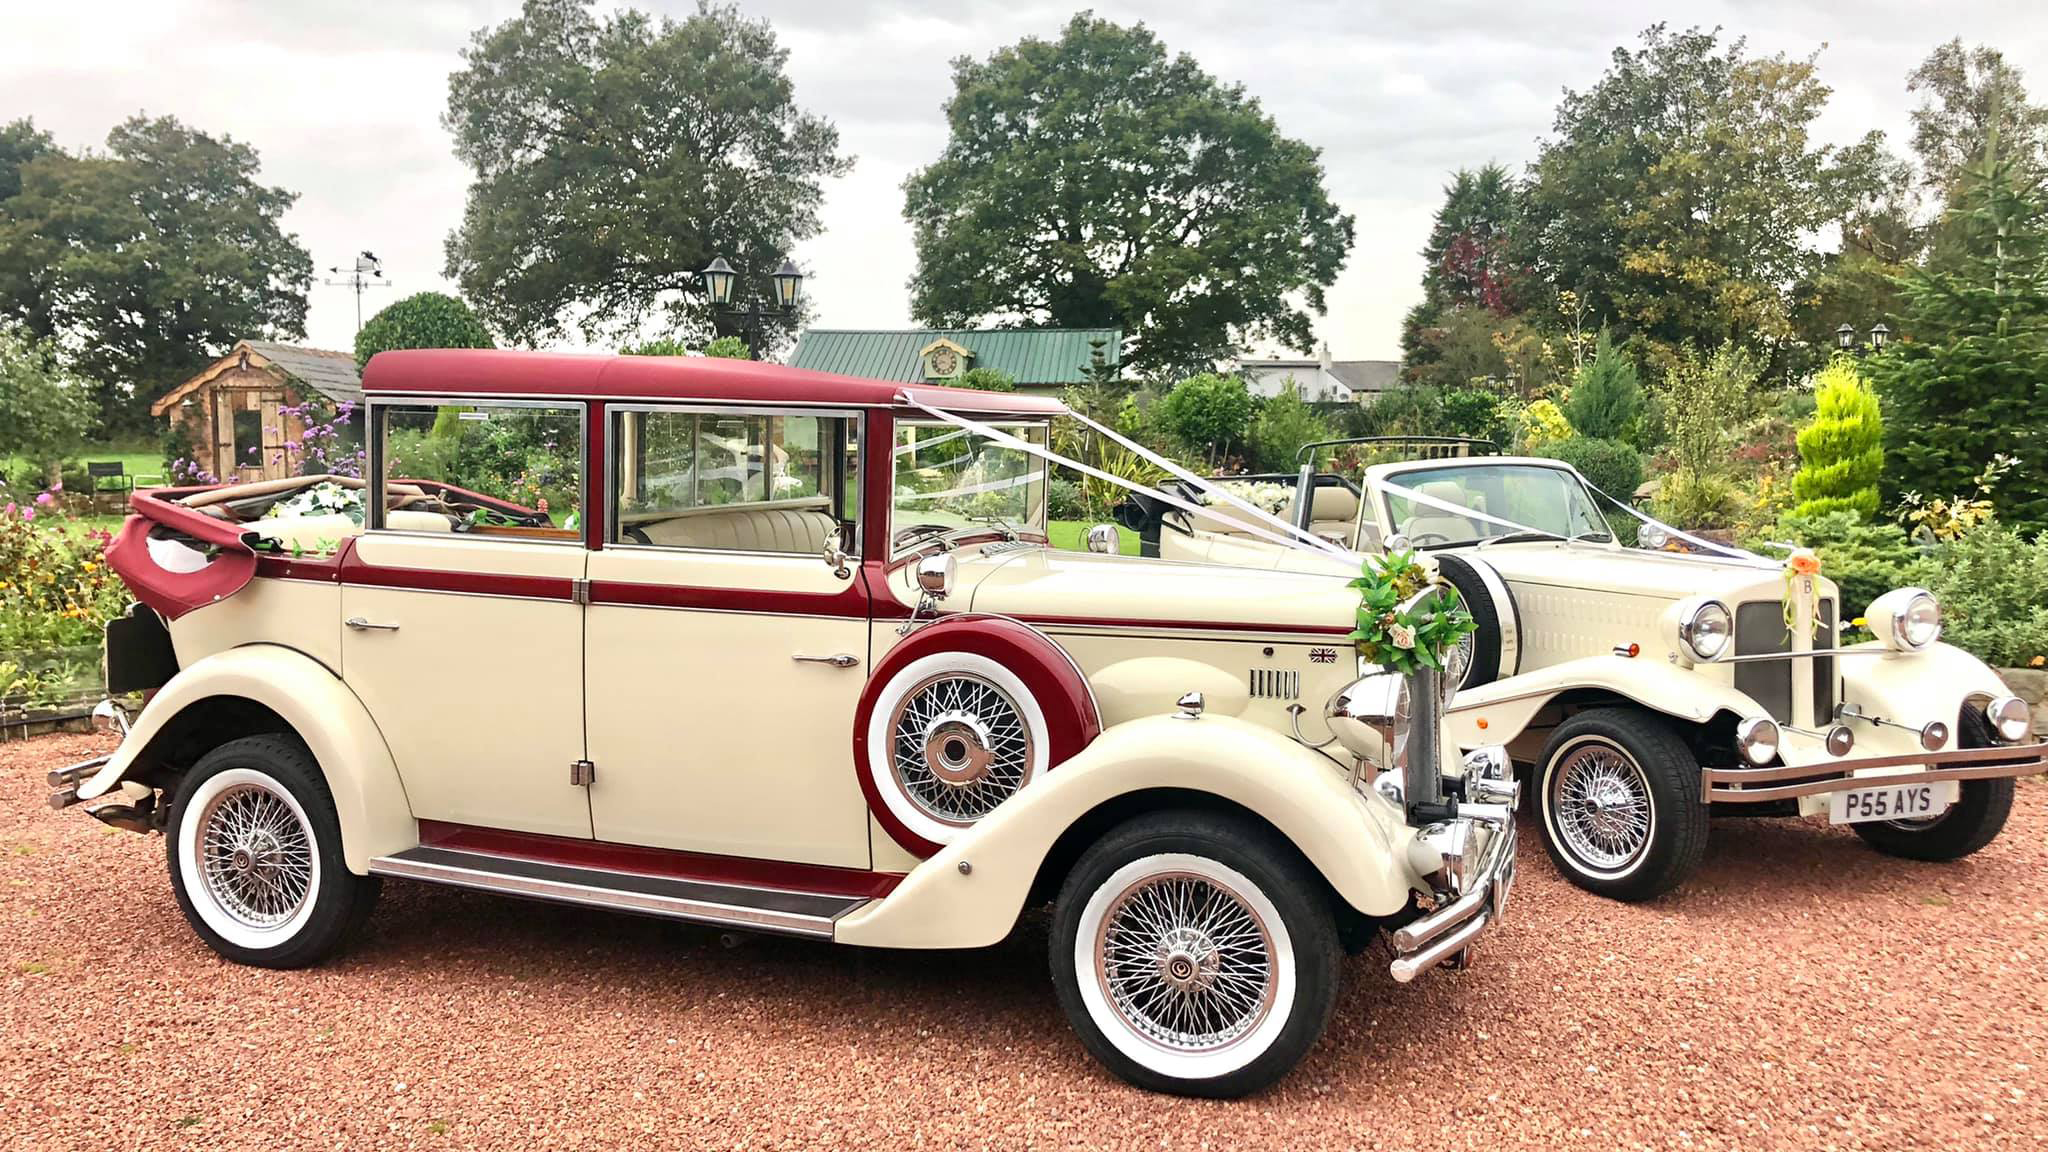 Two vintage wedding cars decorated with white ribbons at a local Crewe wedding. Both vehicles are parked side-by-side